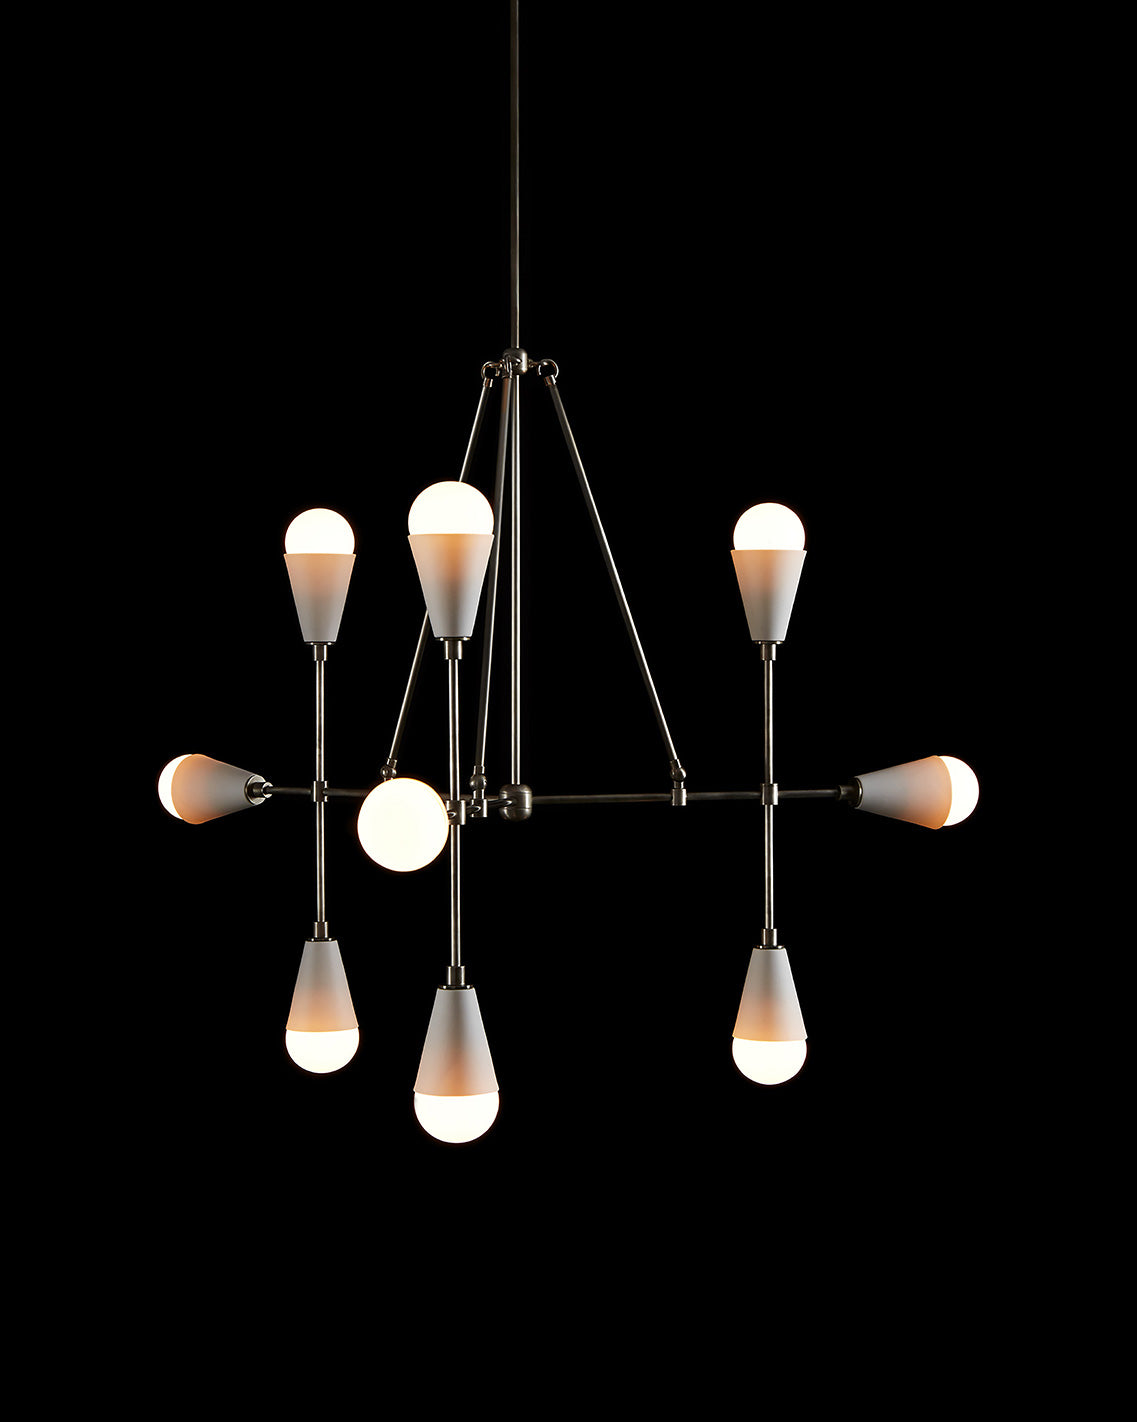 TRIAD : 9 ceiling pendant in Tarnished Silver and Porcelain, hanging against a black background. 